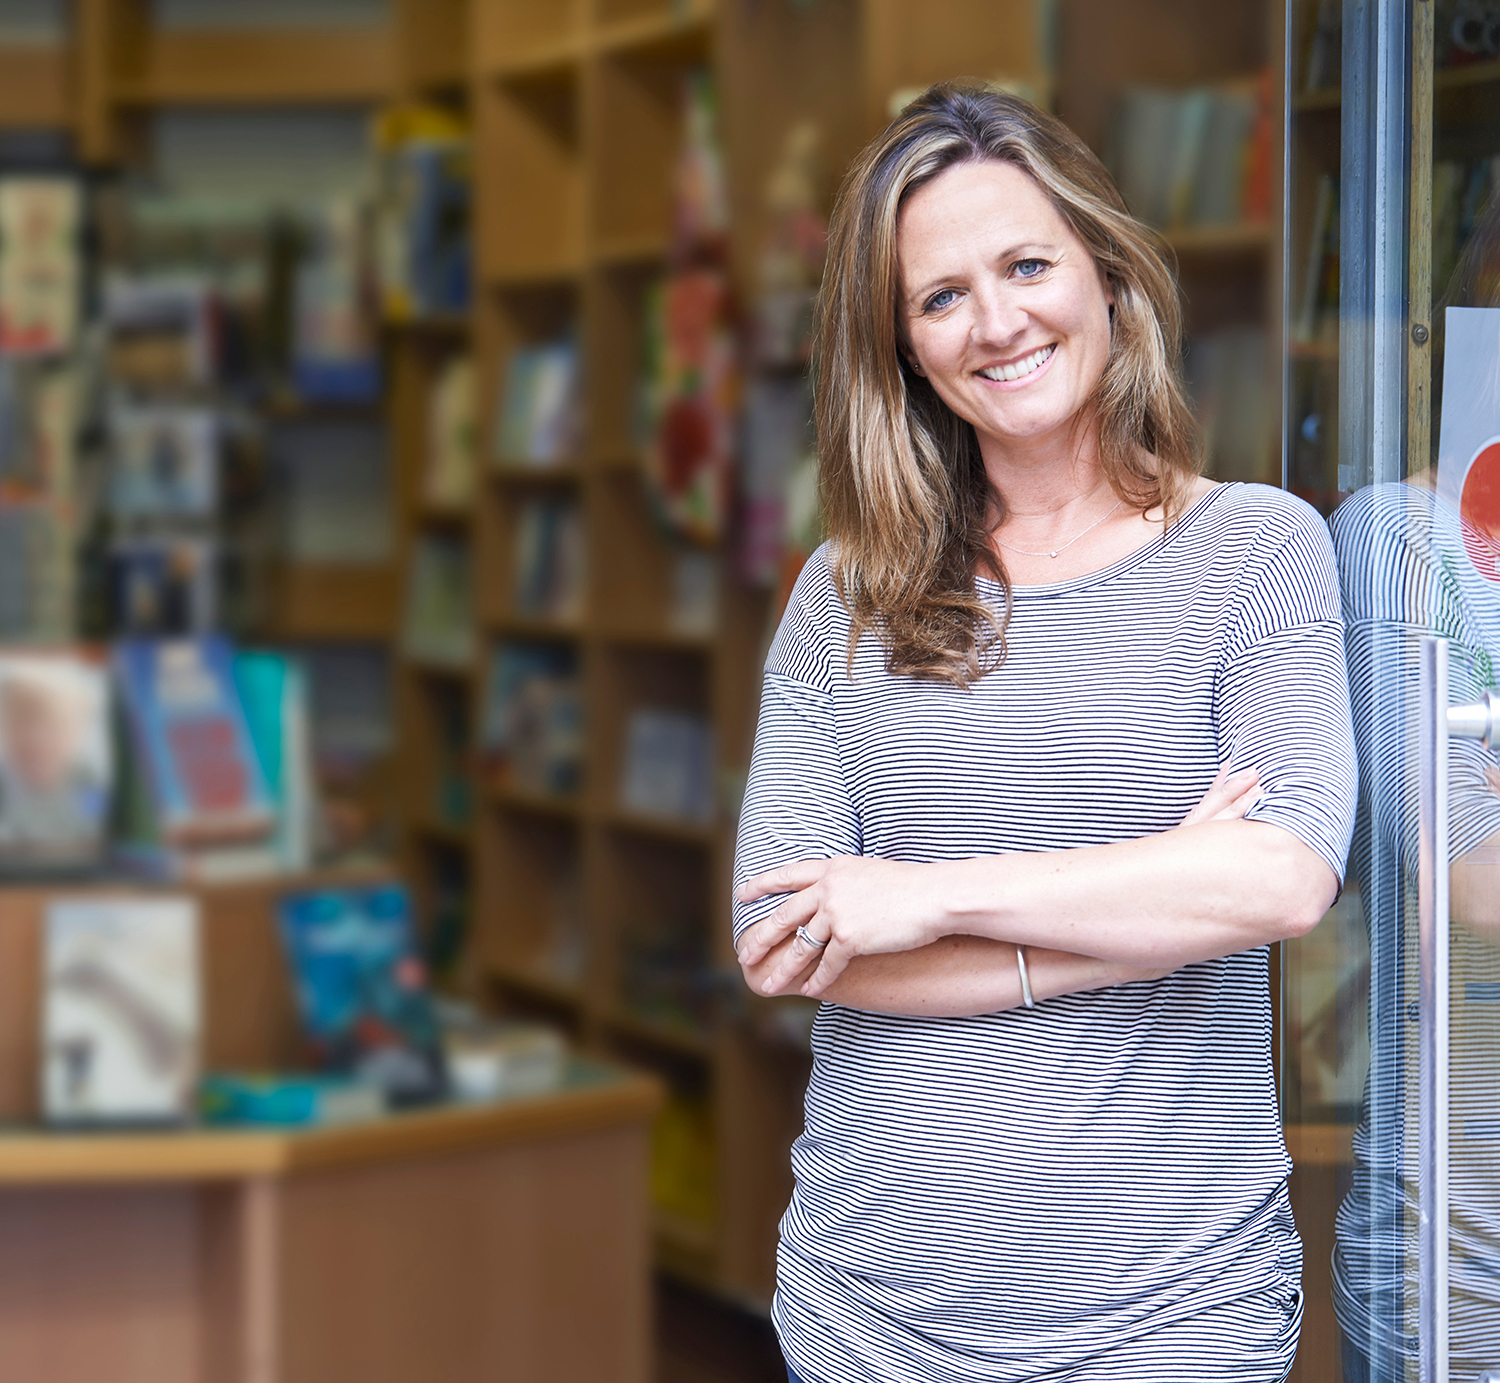 Female shop owner standing in doorway, arms crossed casually in front. Books on shelves in background.